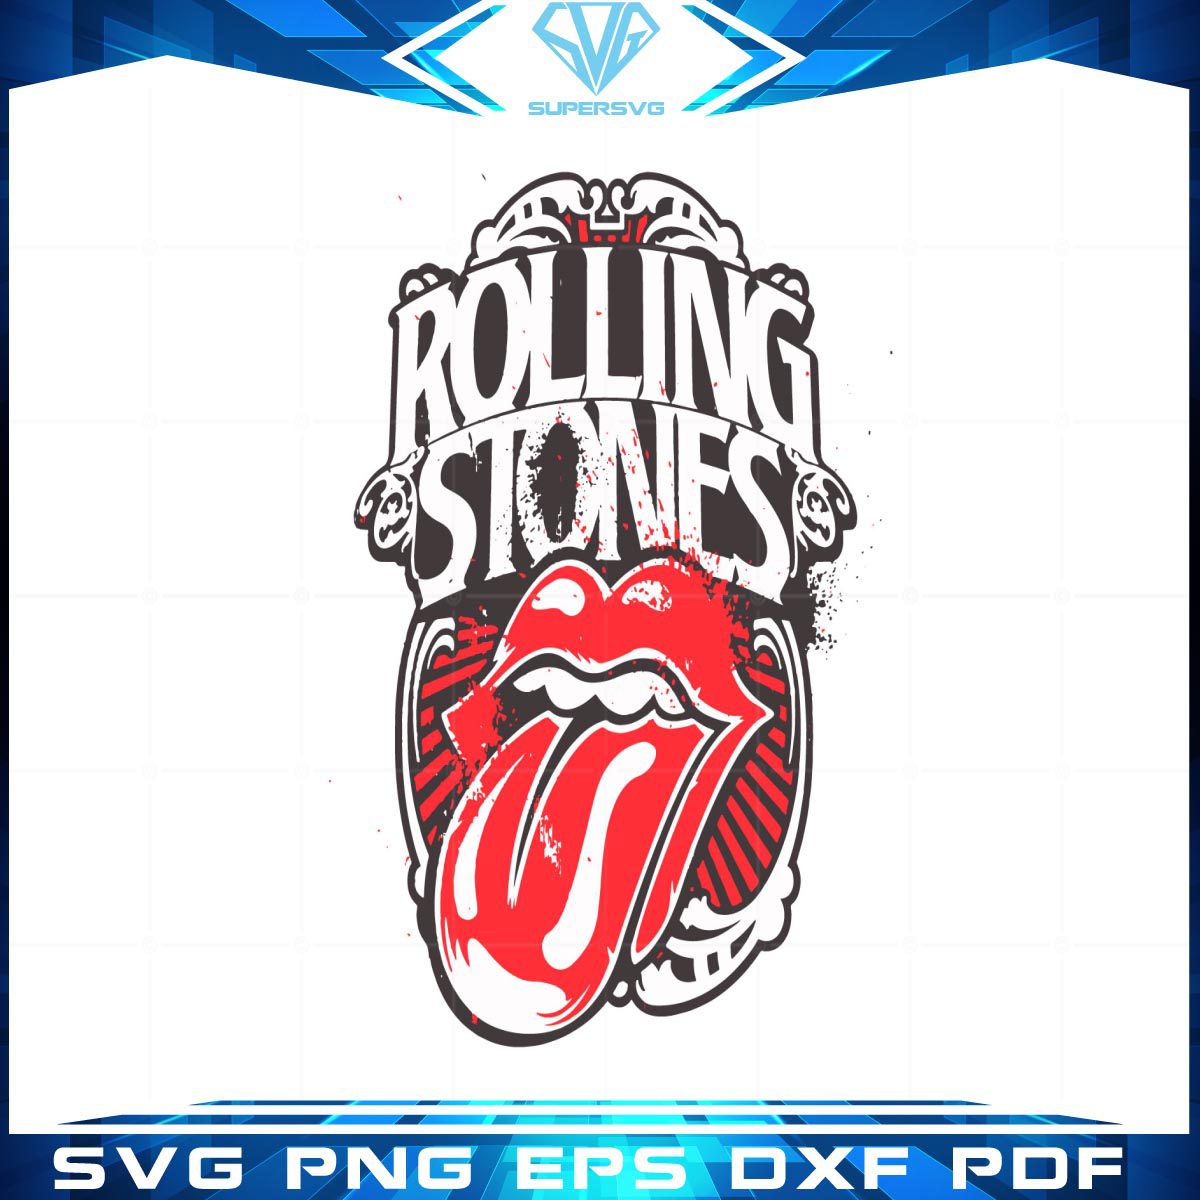 The Rolling Stones SVG cutting files